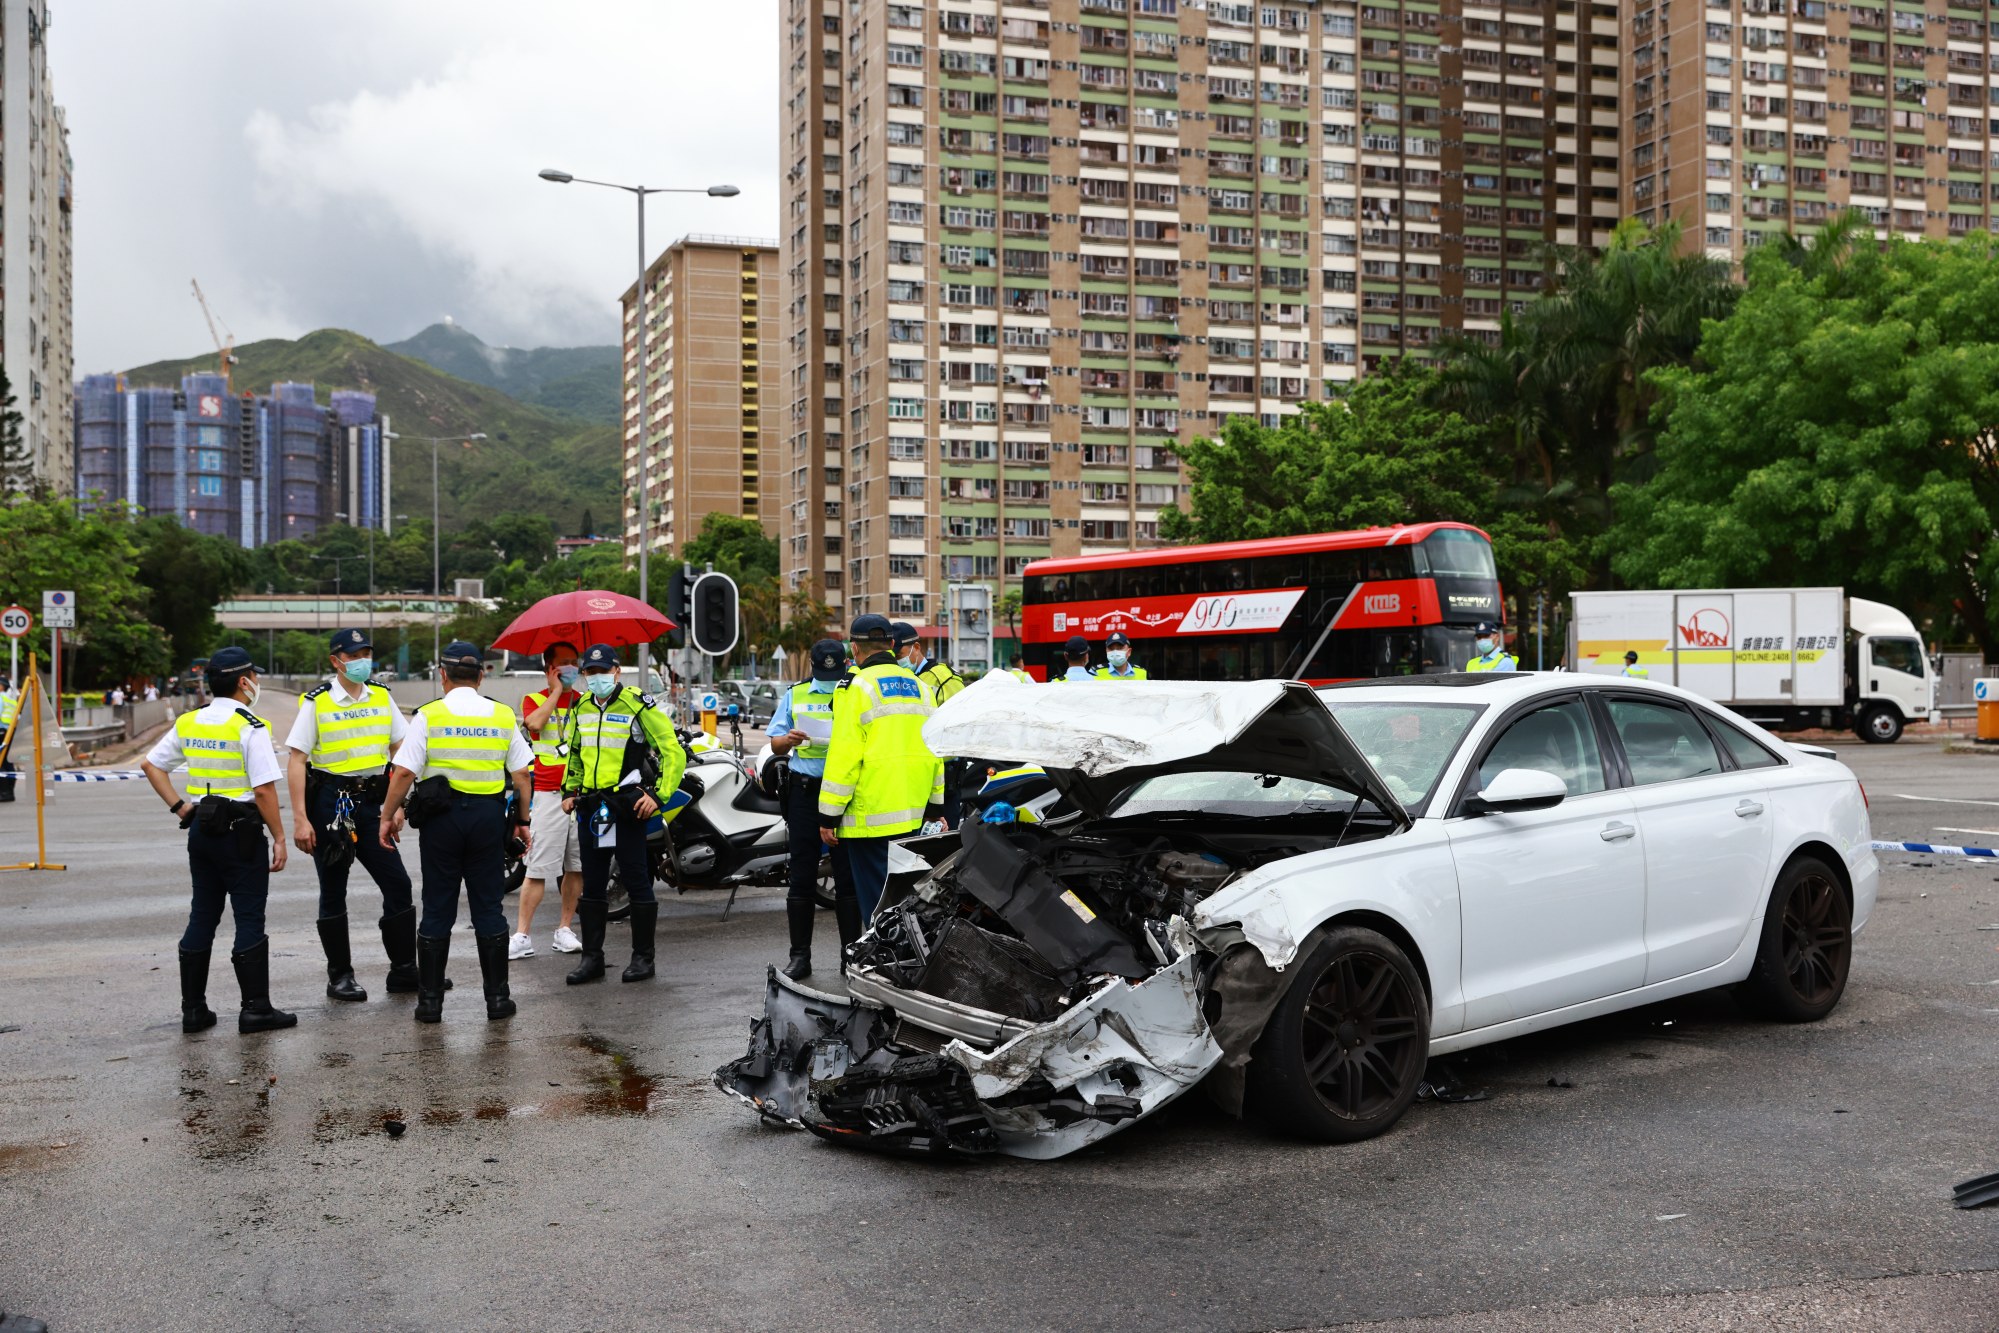 The car driver was also hurt in the accident. Photo: May Tse